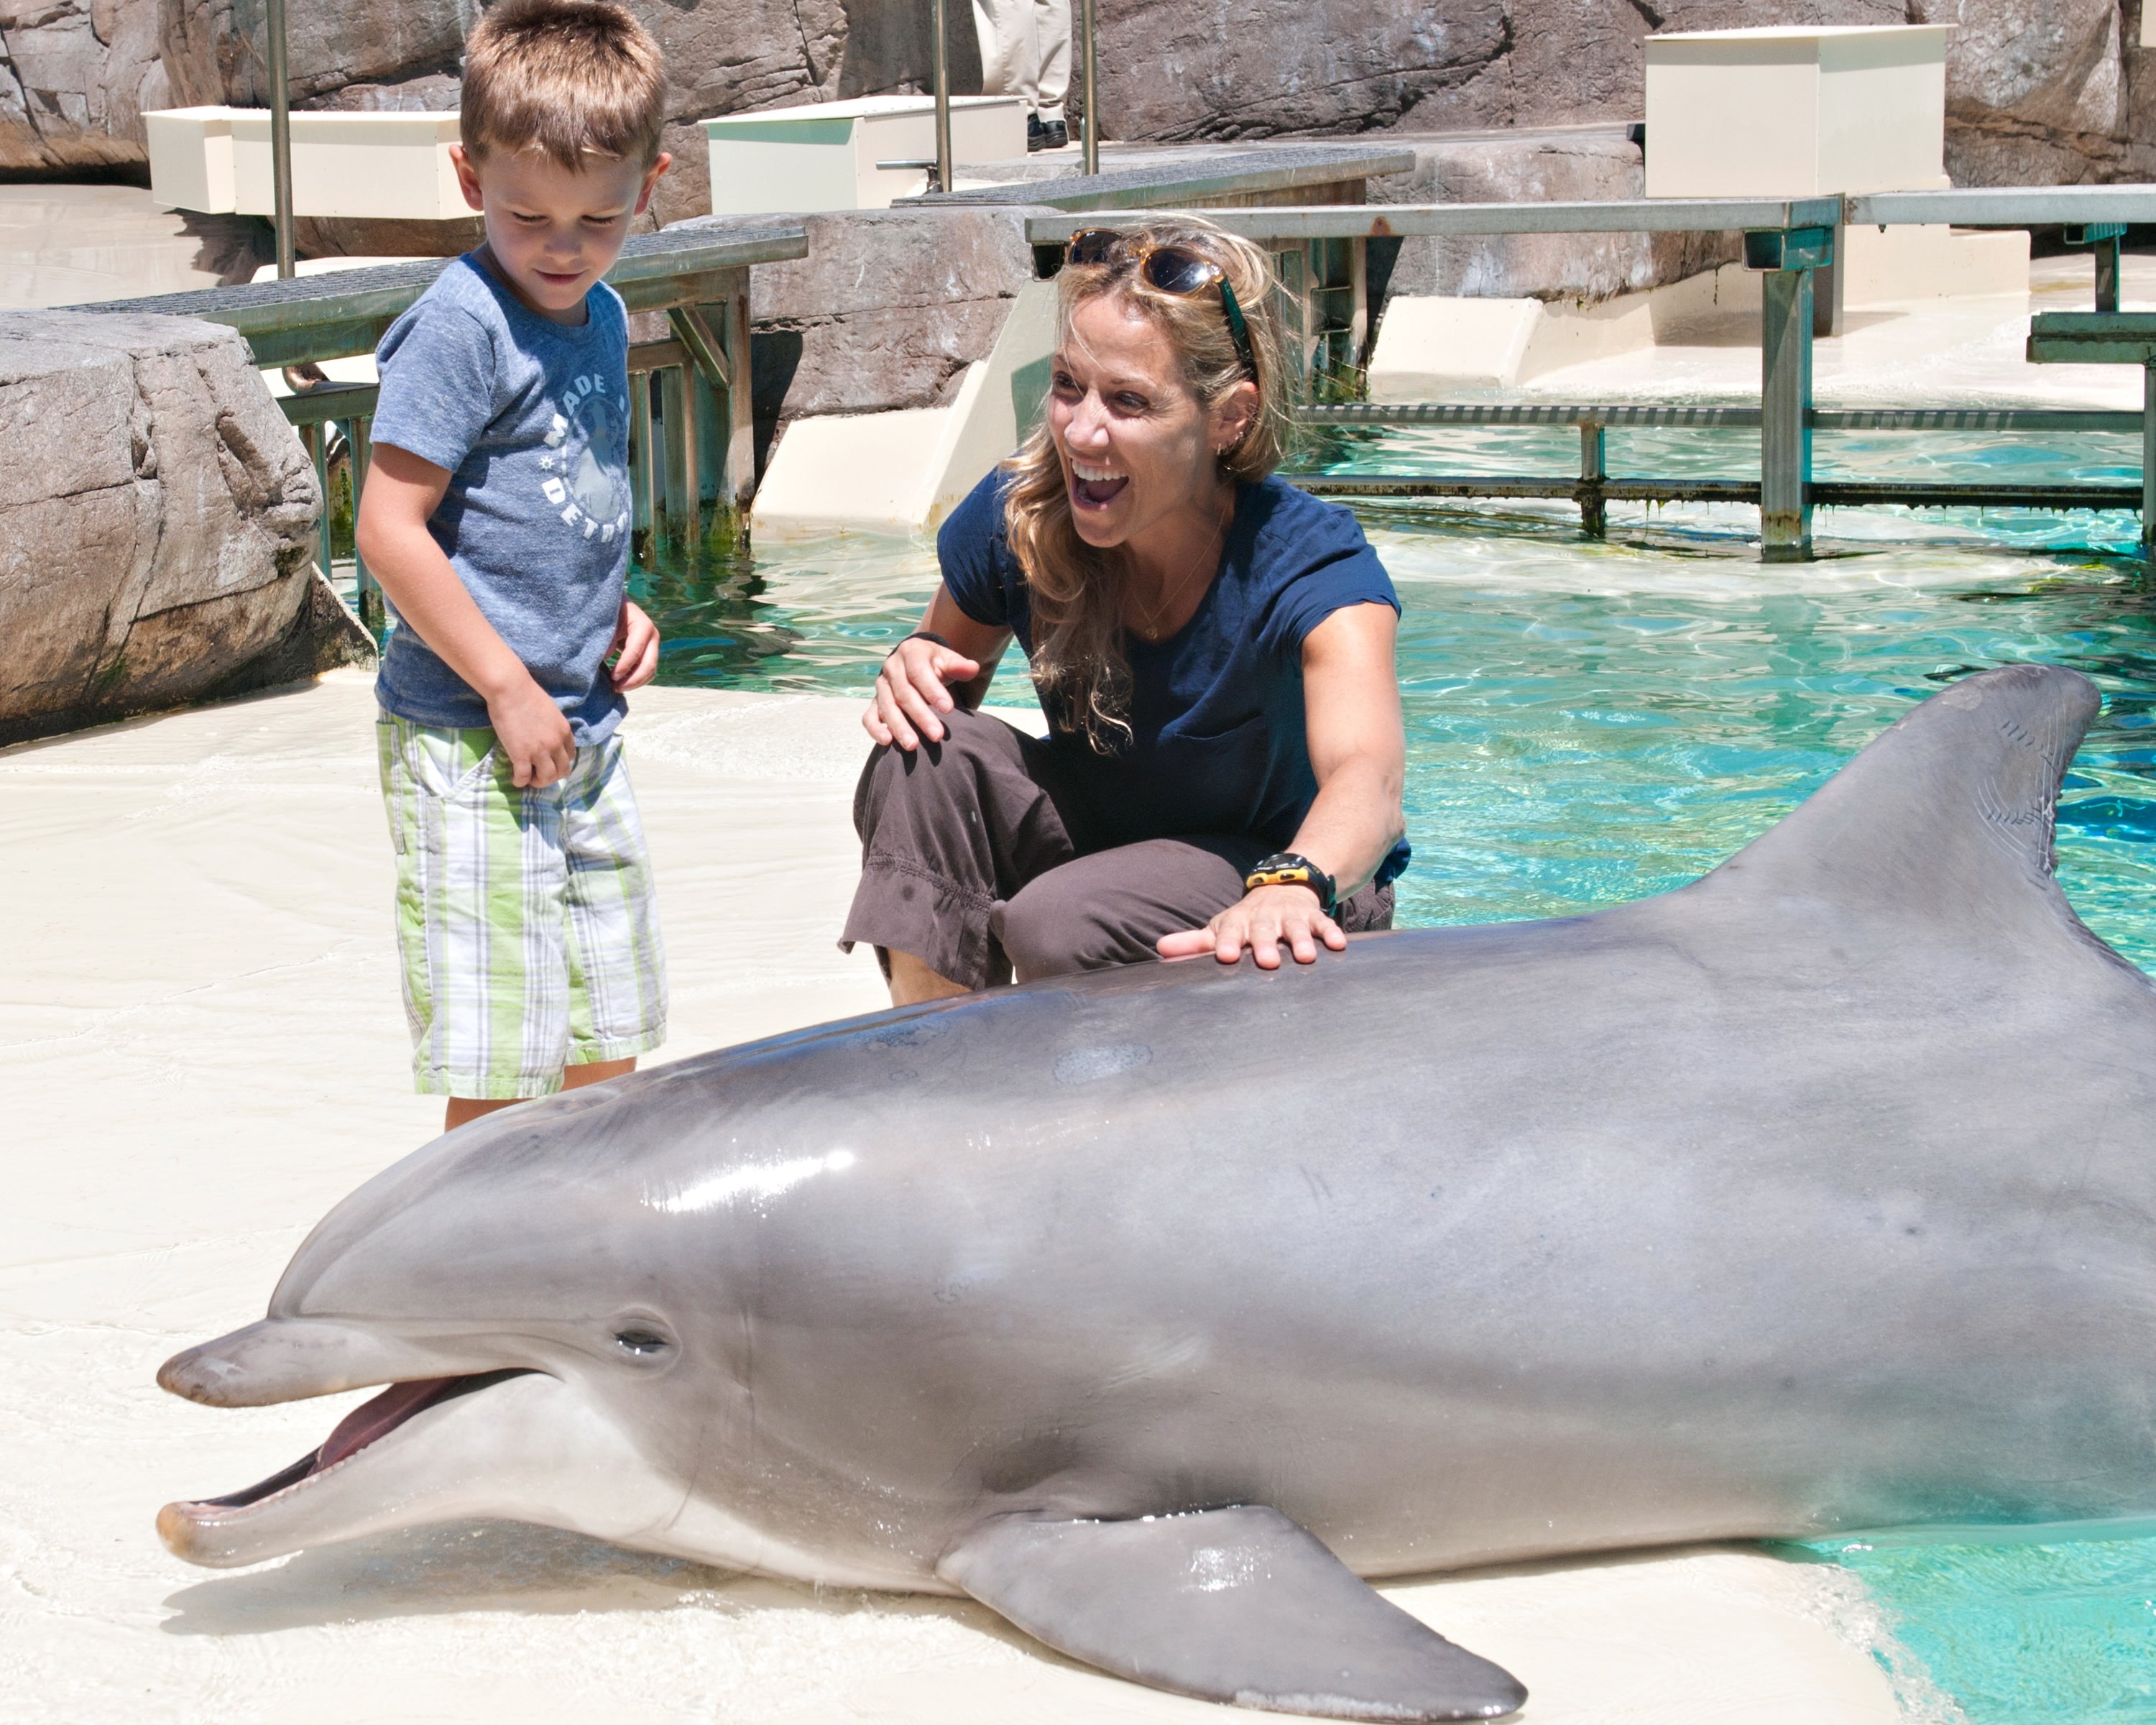 Singer/songwriter Sheryl Crow makes a new friend in Steime, a 22-year-old bottlenose dolphin, at SeaWorld San Diego on July 26, 2012 in San Diego, California. (Mike Aguilera/SeaWorld San Diego via Getty Images)